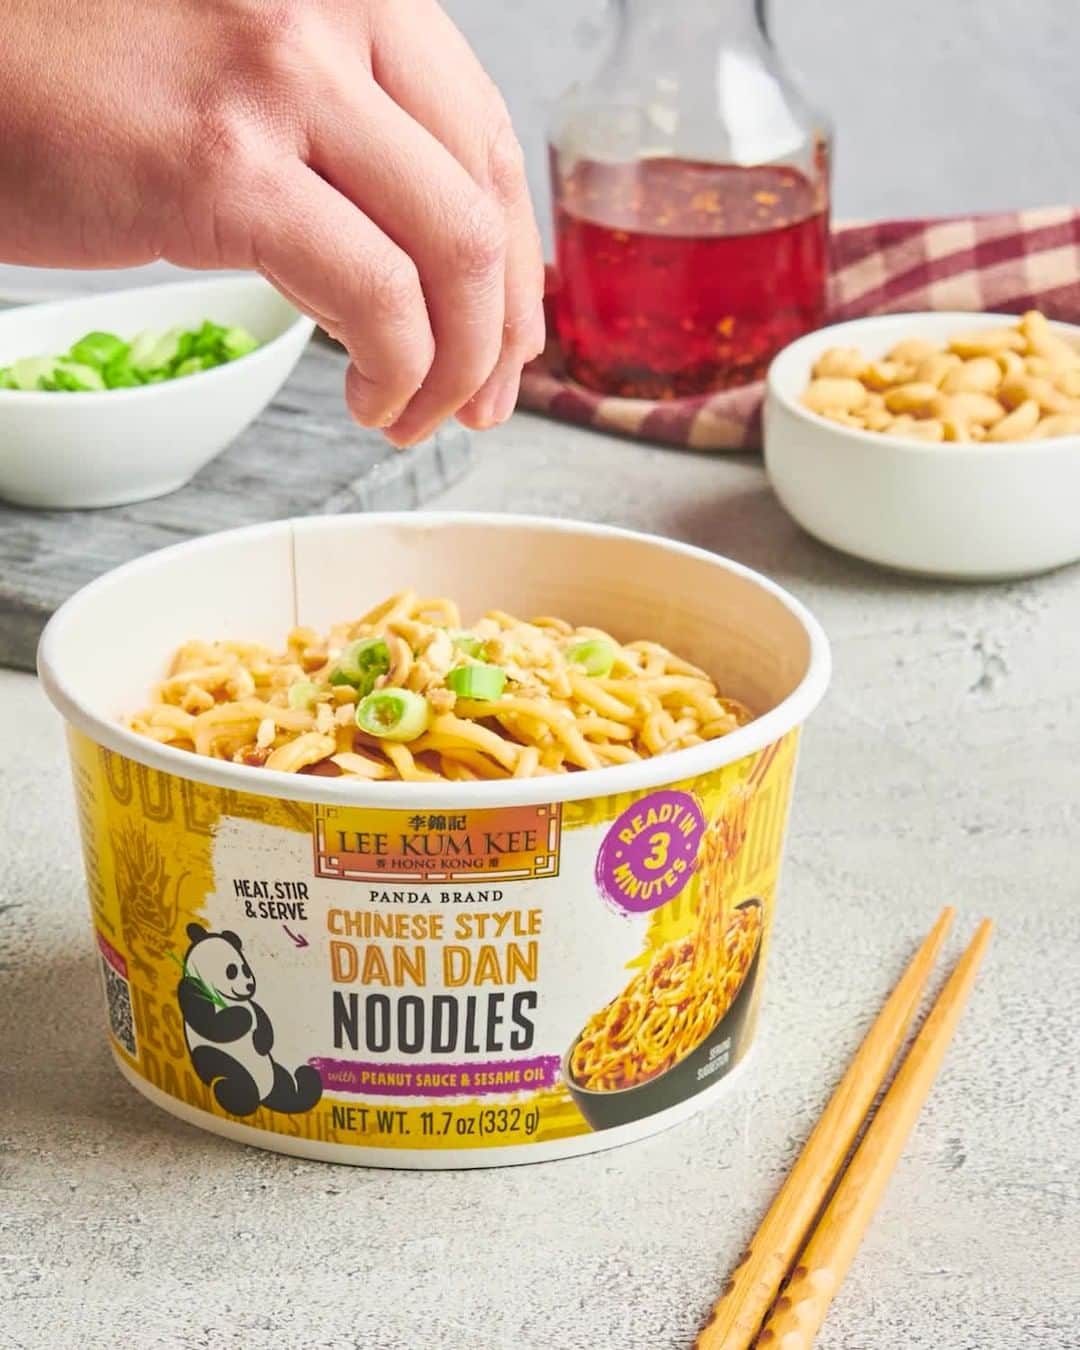 Lee Kum Kee USA（李錦記）のインスタグラム：「Lee Kum Kee Panda Brand Chinese Style Dan Dan Noodles are a must for your pantry! Enjoy these tasty noodles for a quick lunch or mid-afternoon pick-me-up throughout the week. Don’t forget to top with crushed peanuts for some extra crunch!」